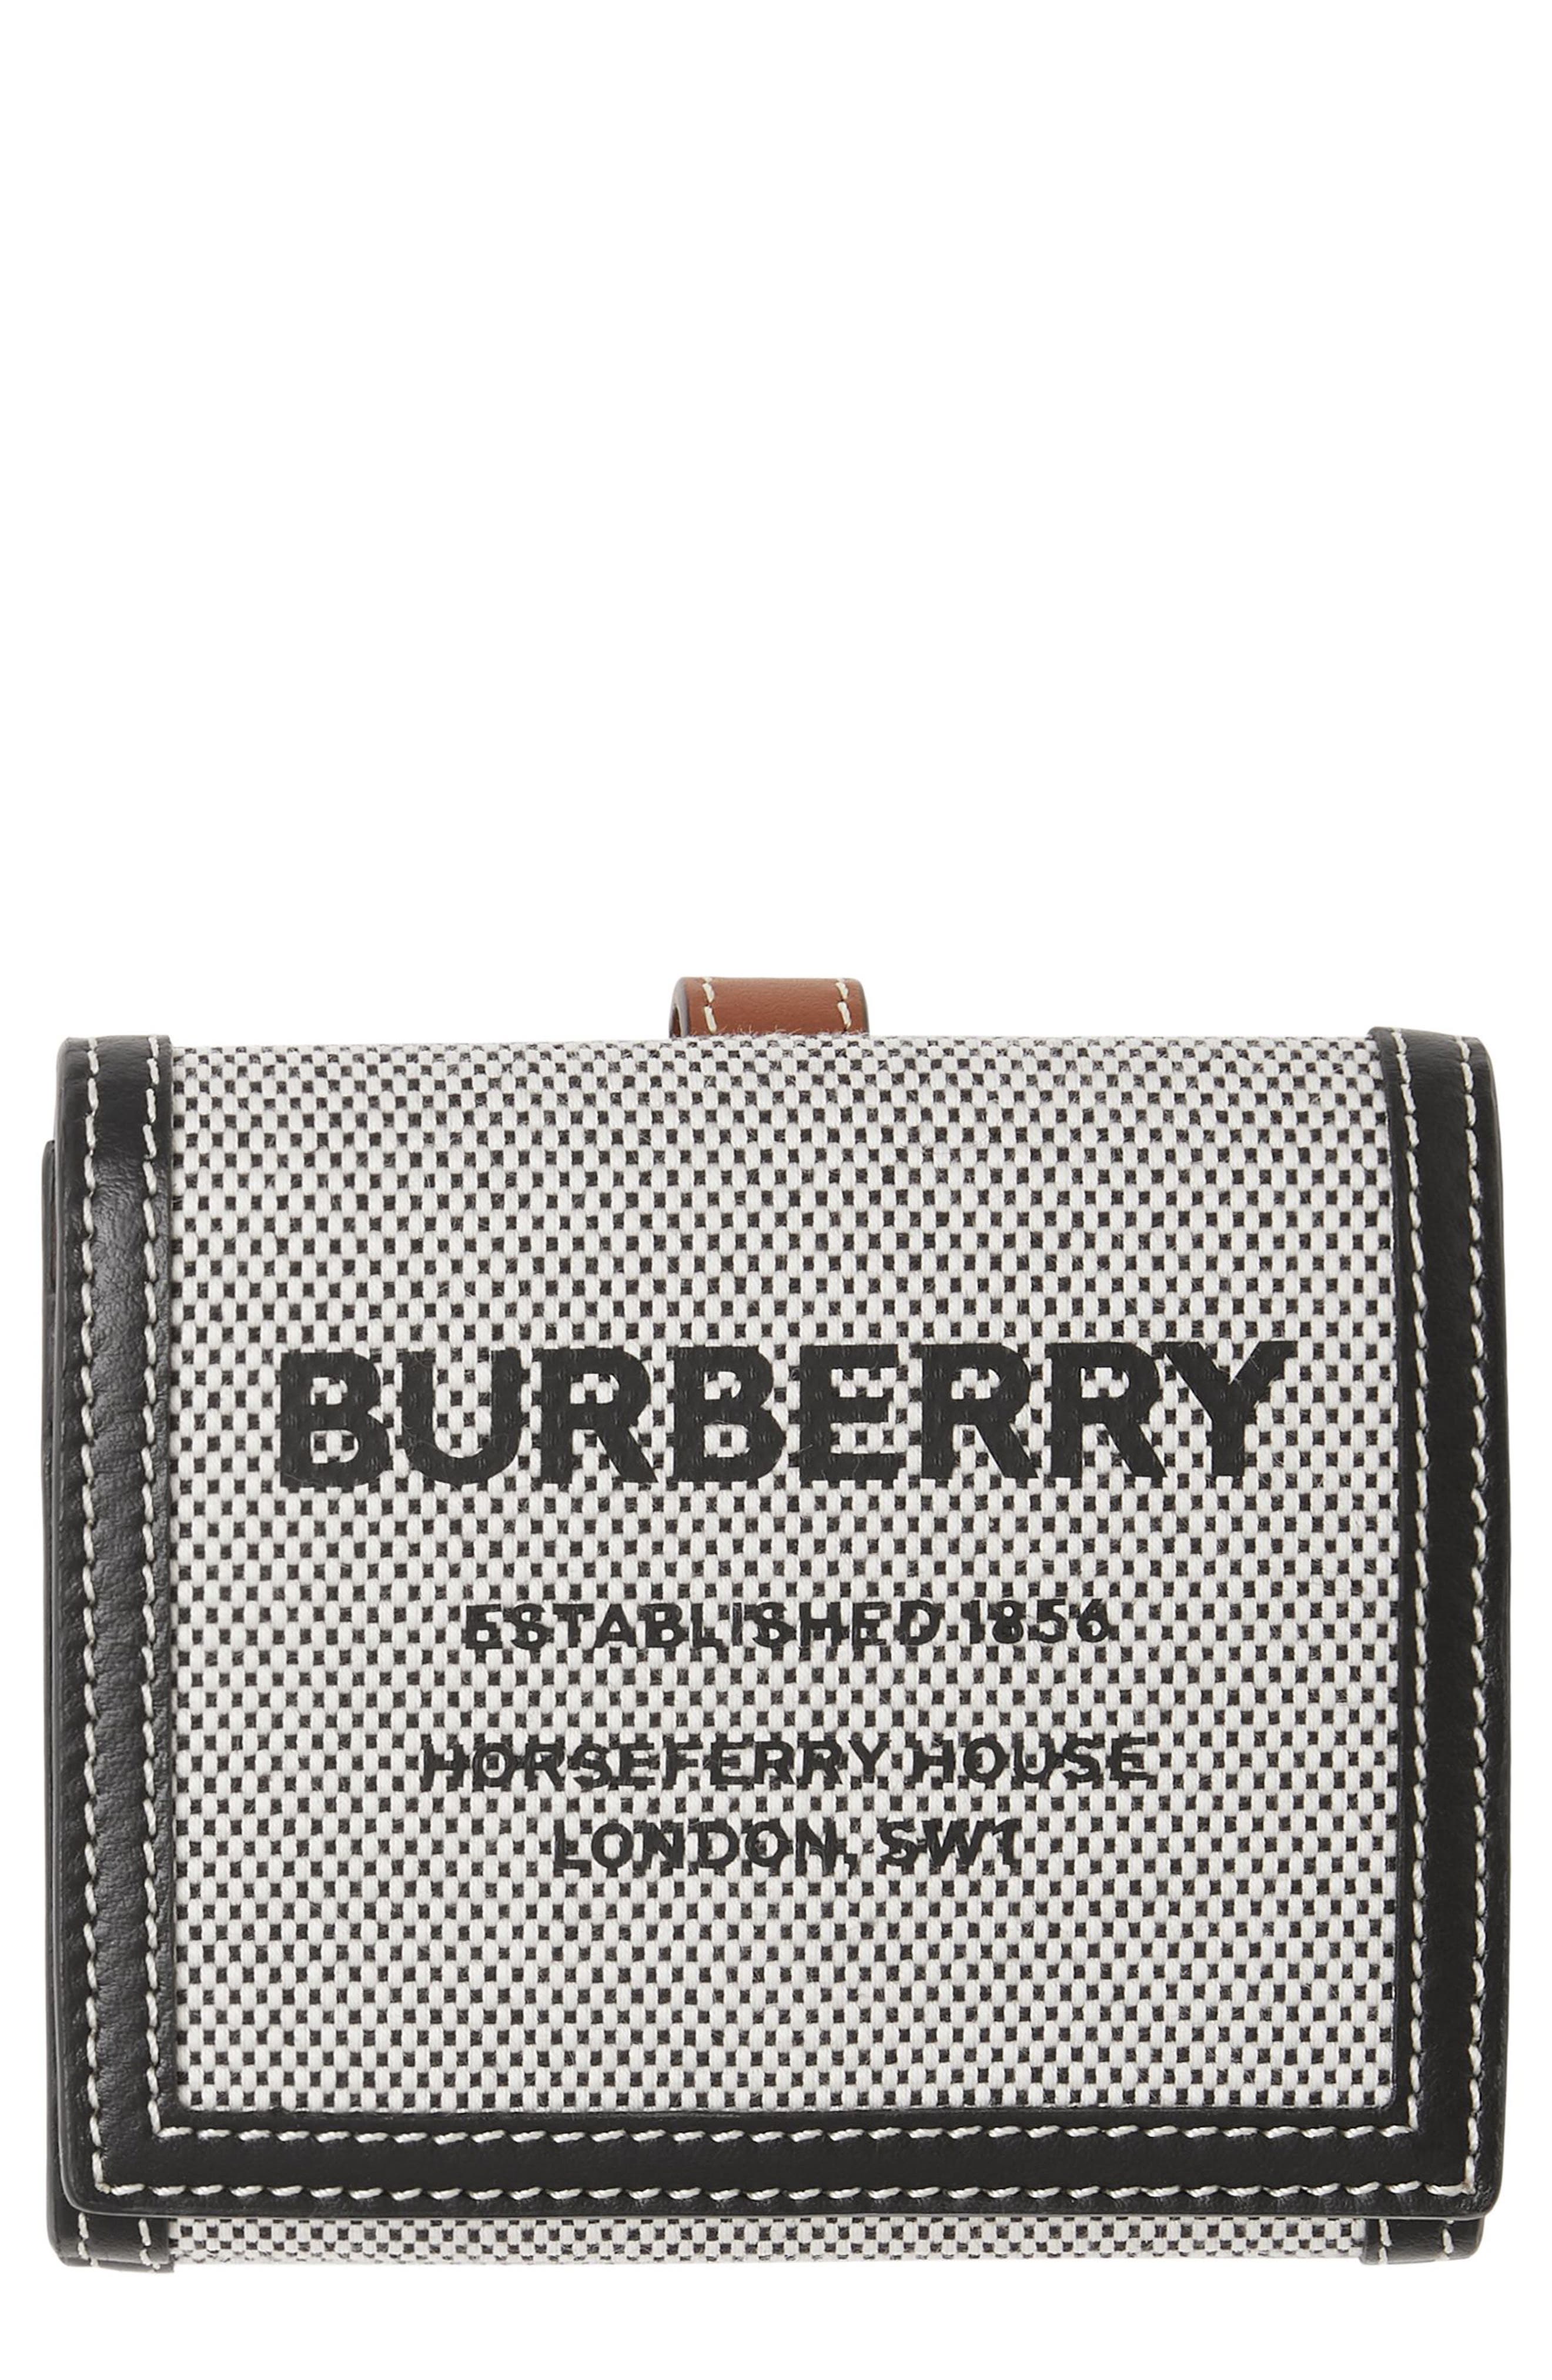 Burberry Luna Horseferry Print Canvas Wallet in Black/Tan at Nordstrom